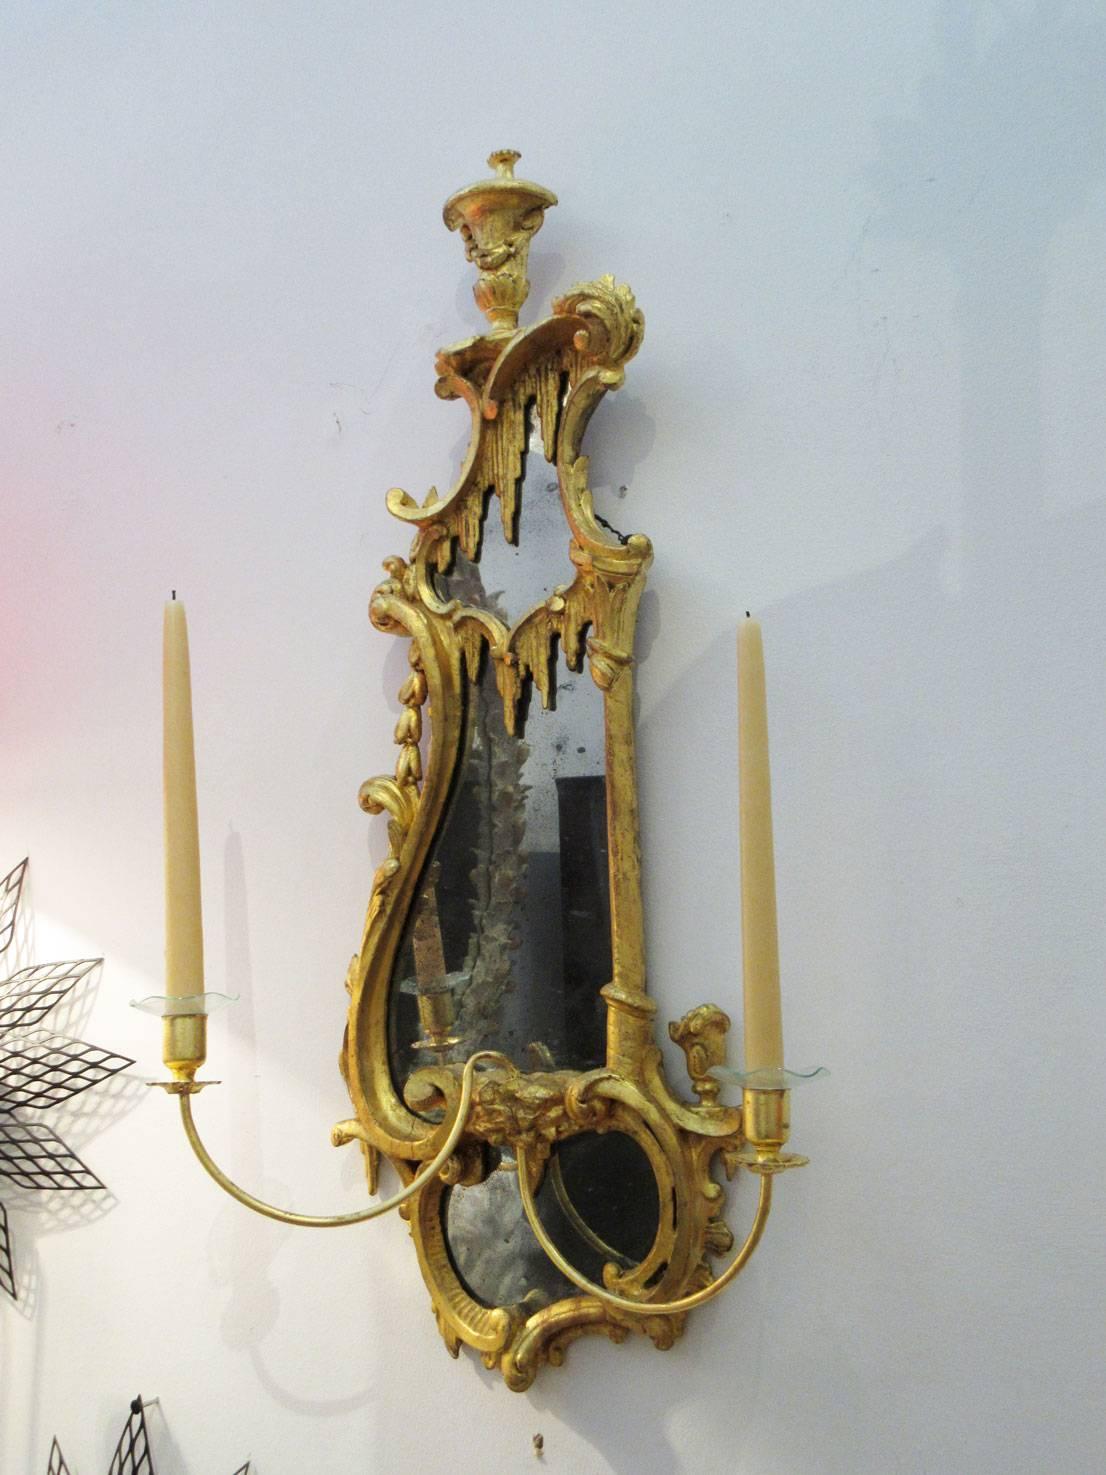 Pair of antique 18th century George III wall sconces with asymmetrical mirrors and candle holders. Frames are ornately carved giltwood with sweeping 'C' curves, rocaille, and relief decoration. Each sconce has two adjustable candle holders that can